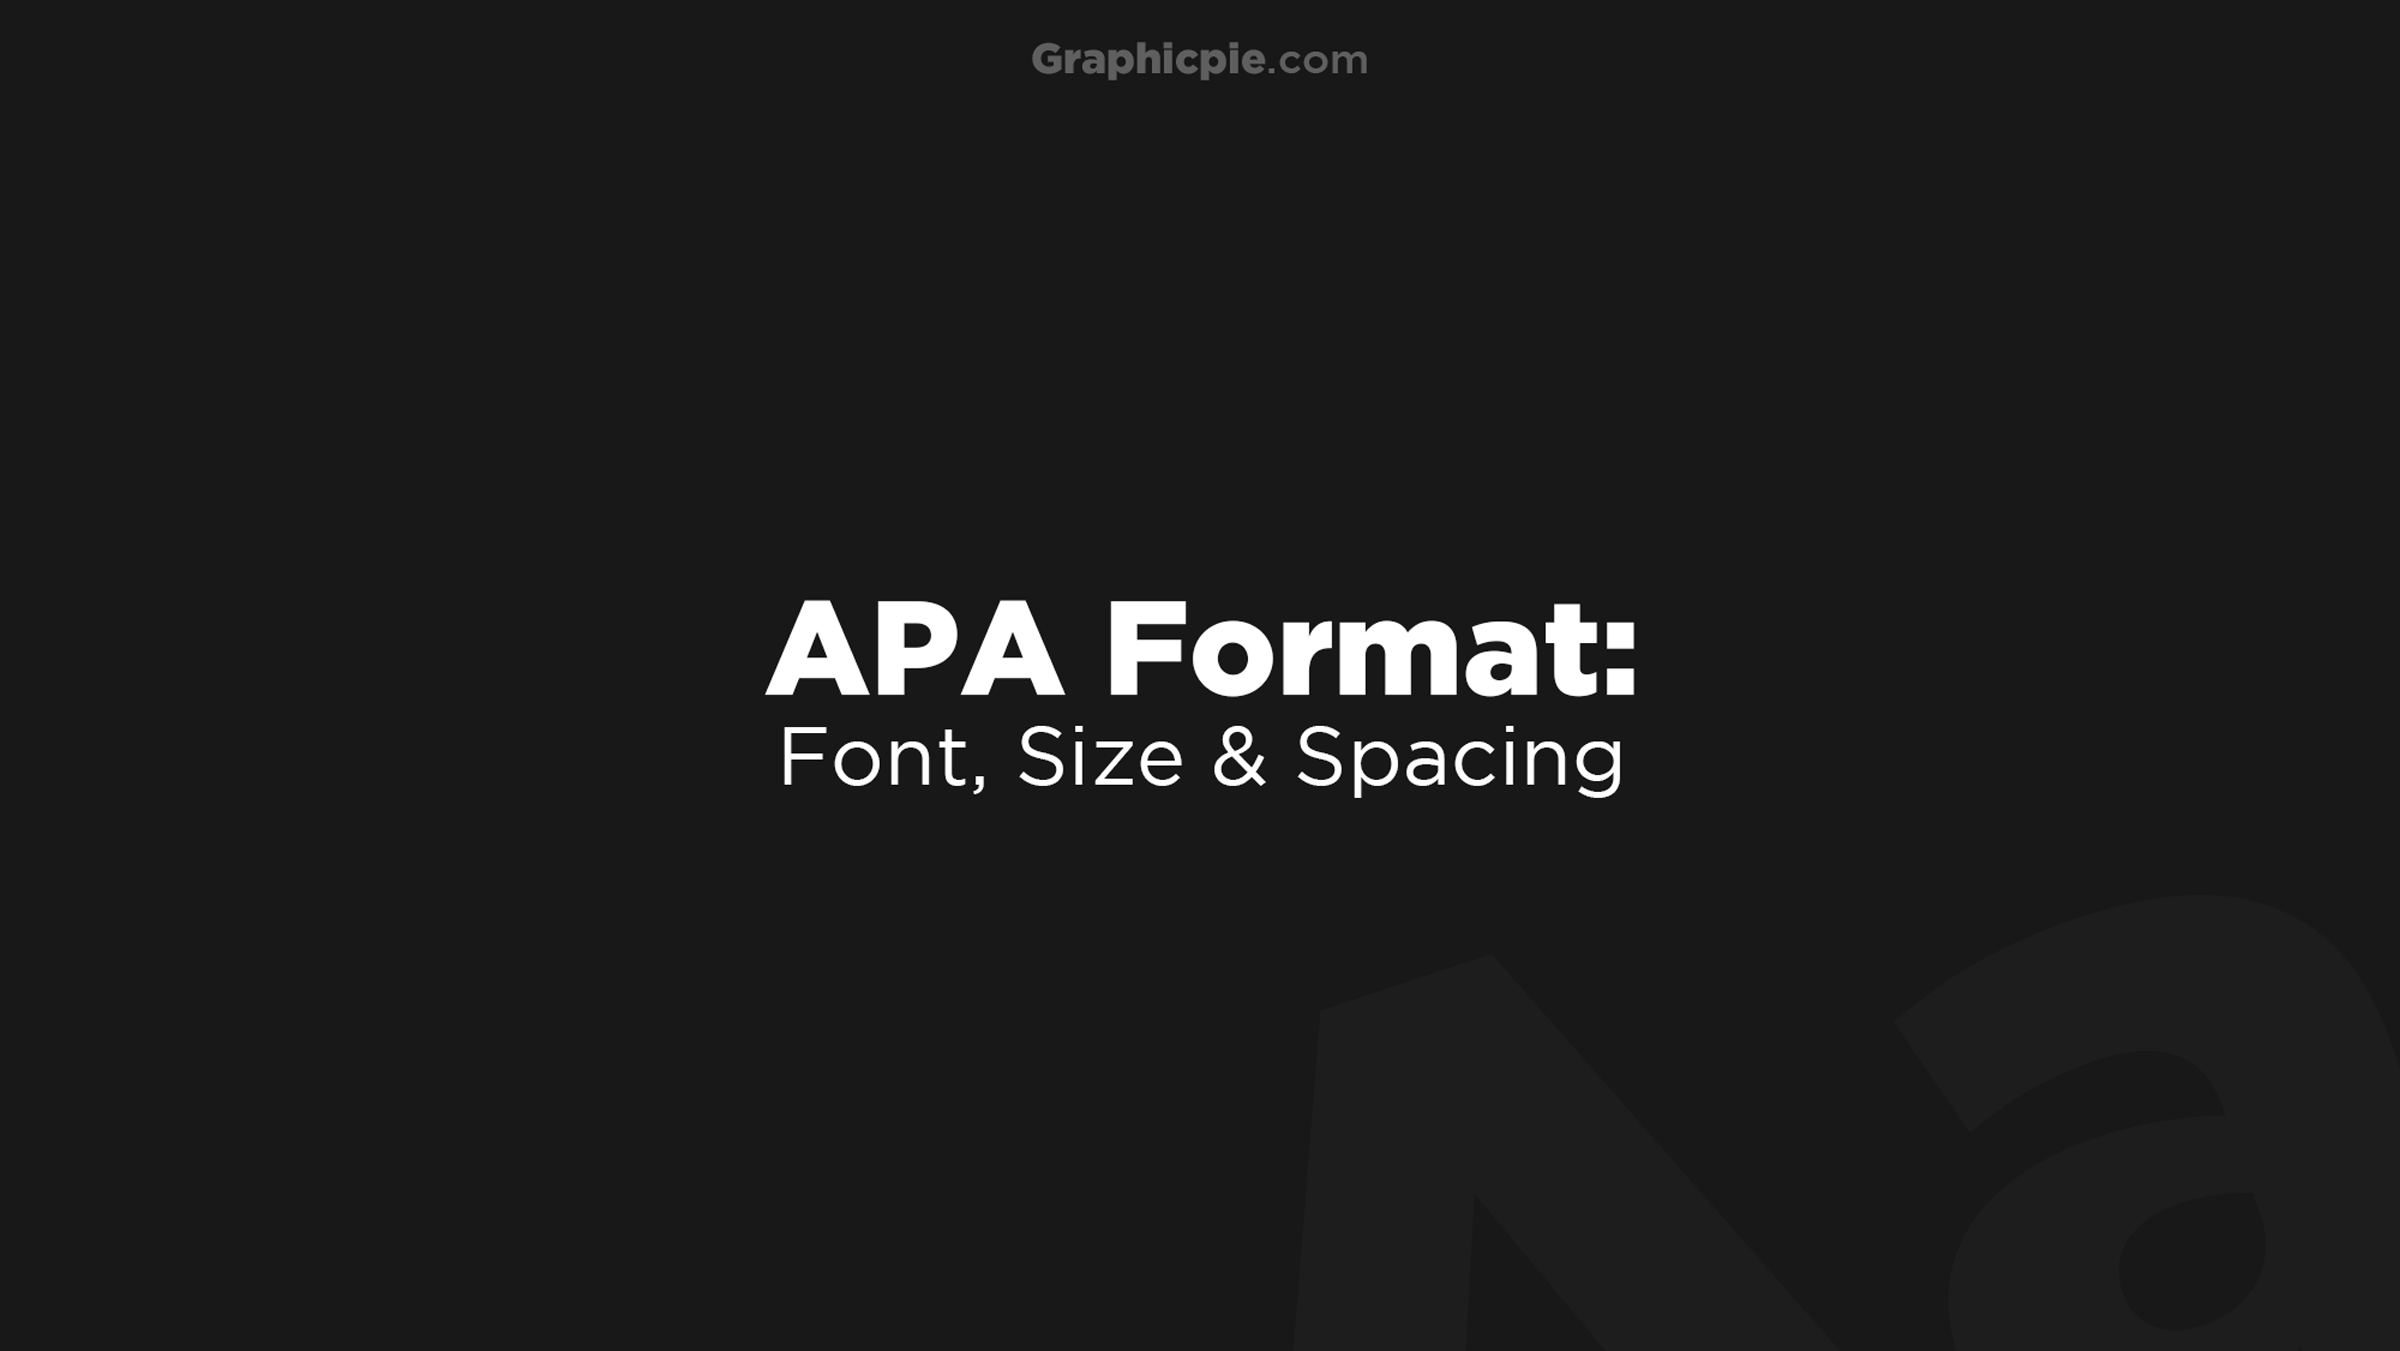 Apa Format Font Size Spacing Explained Graphic Pie